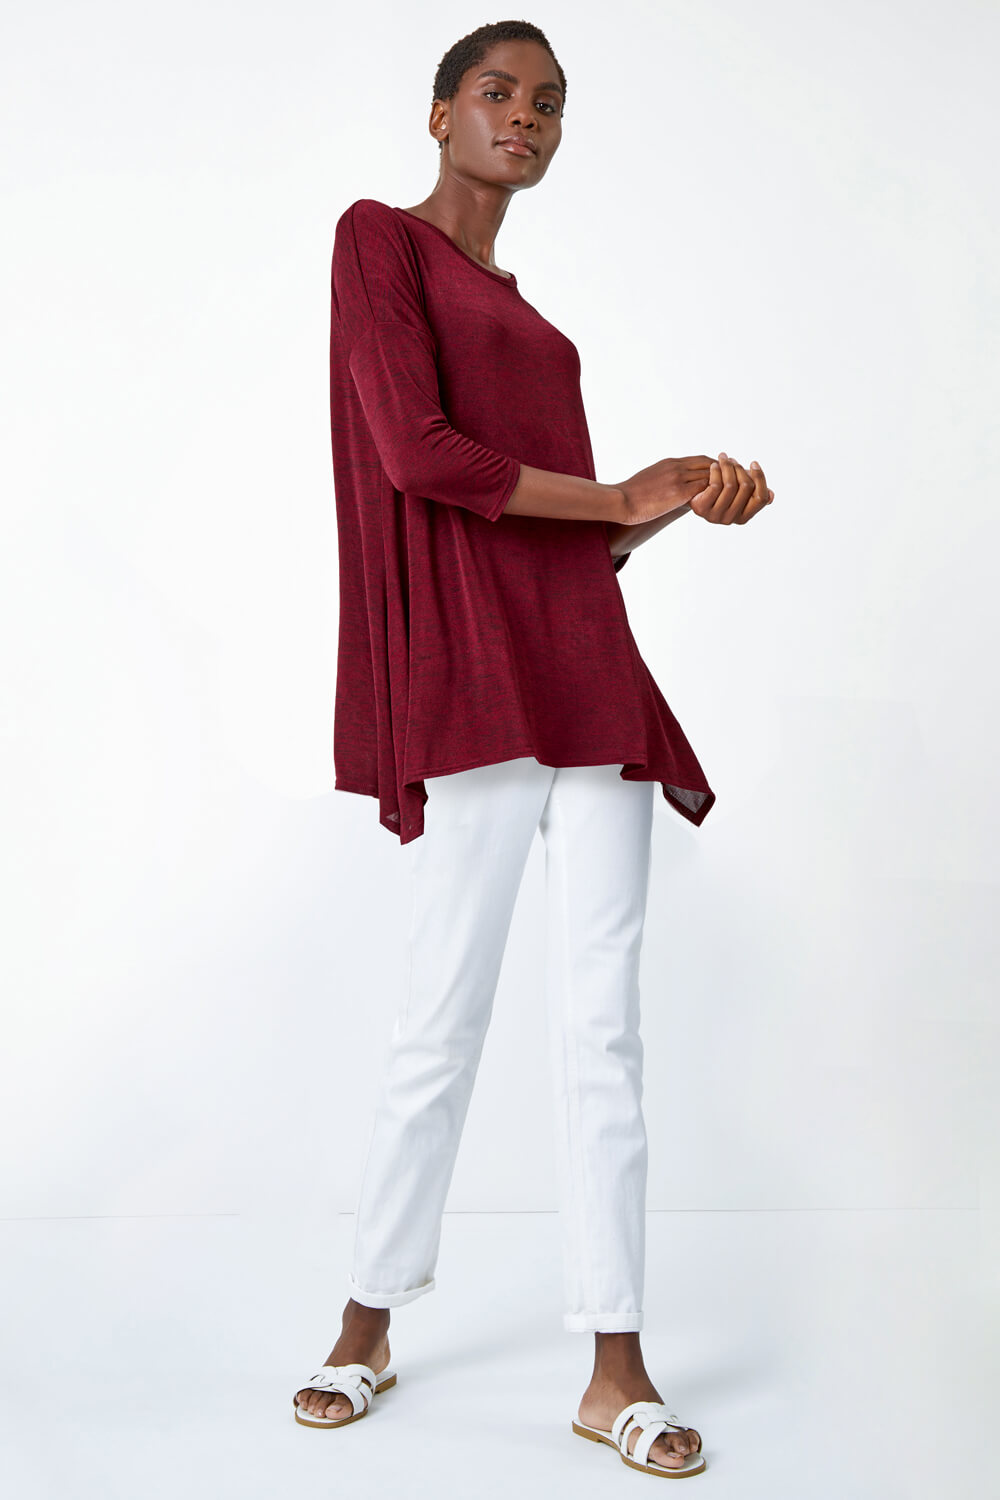 Red Marl Soft Stretch Top, Image 2 of 5